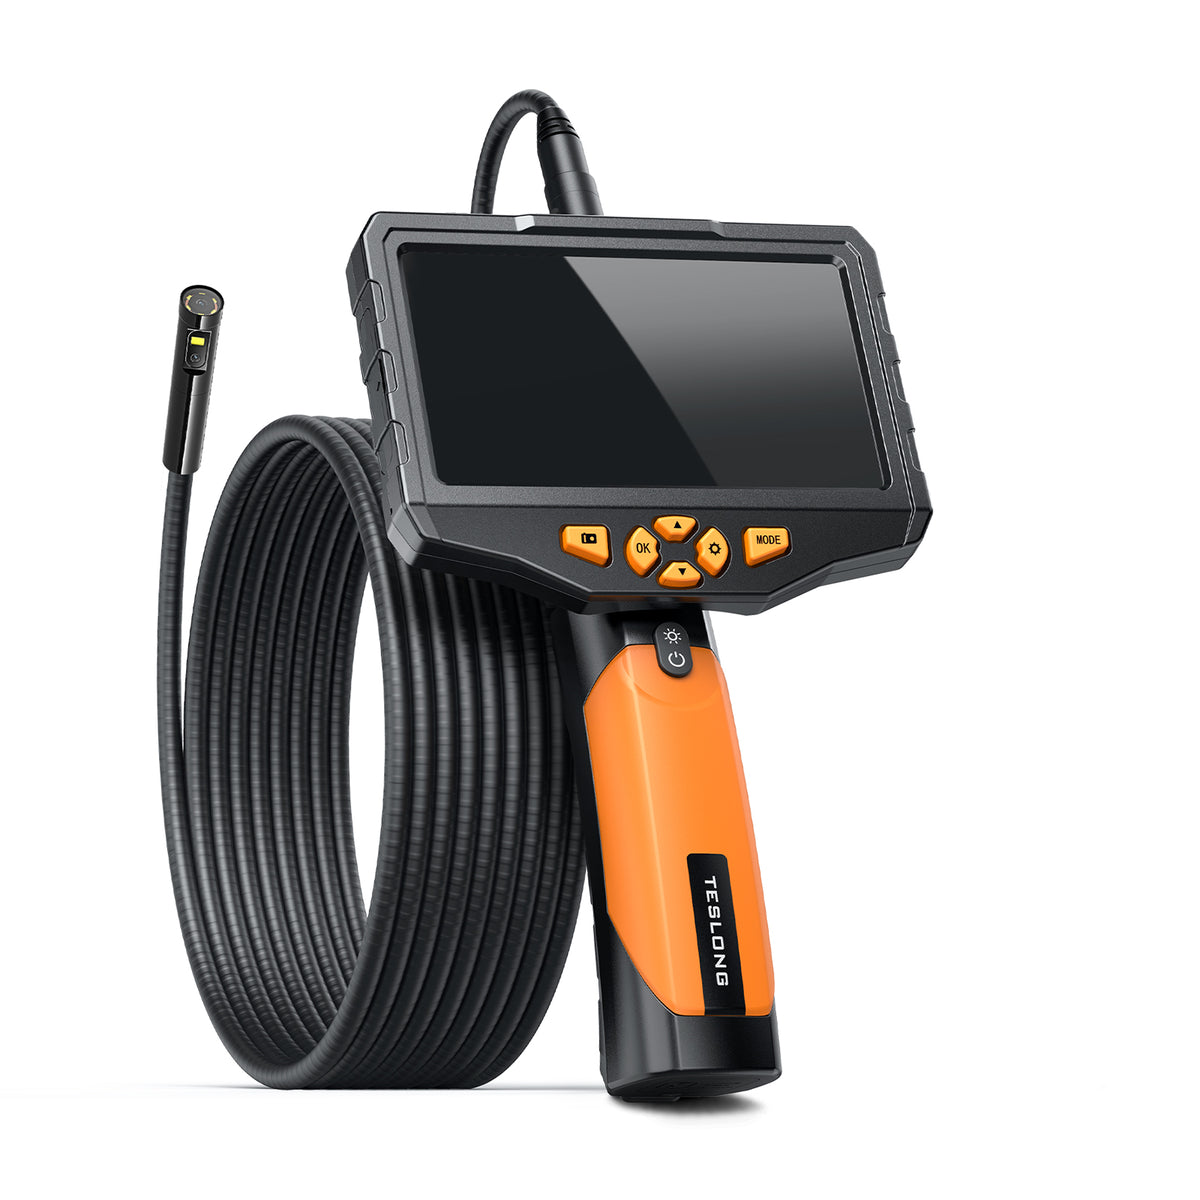 NTS300 Pro Triple-Lens Inspection Camera with 5-inch HD Screen Teslong